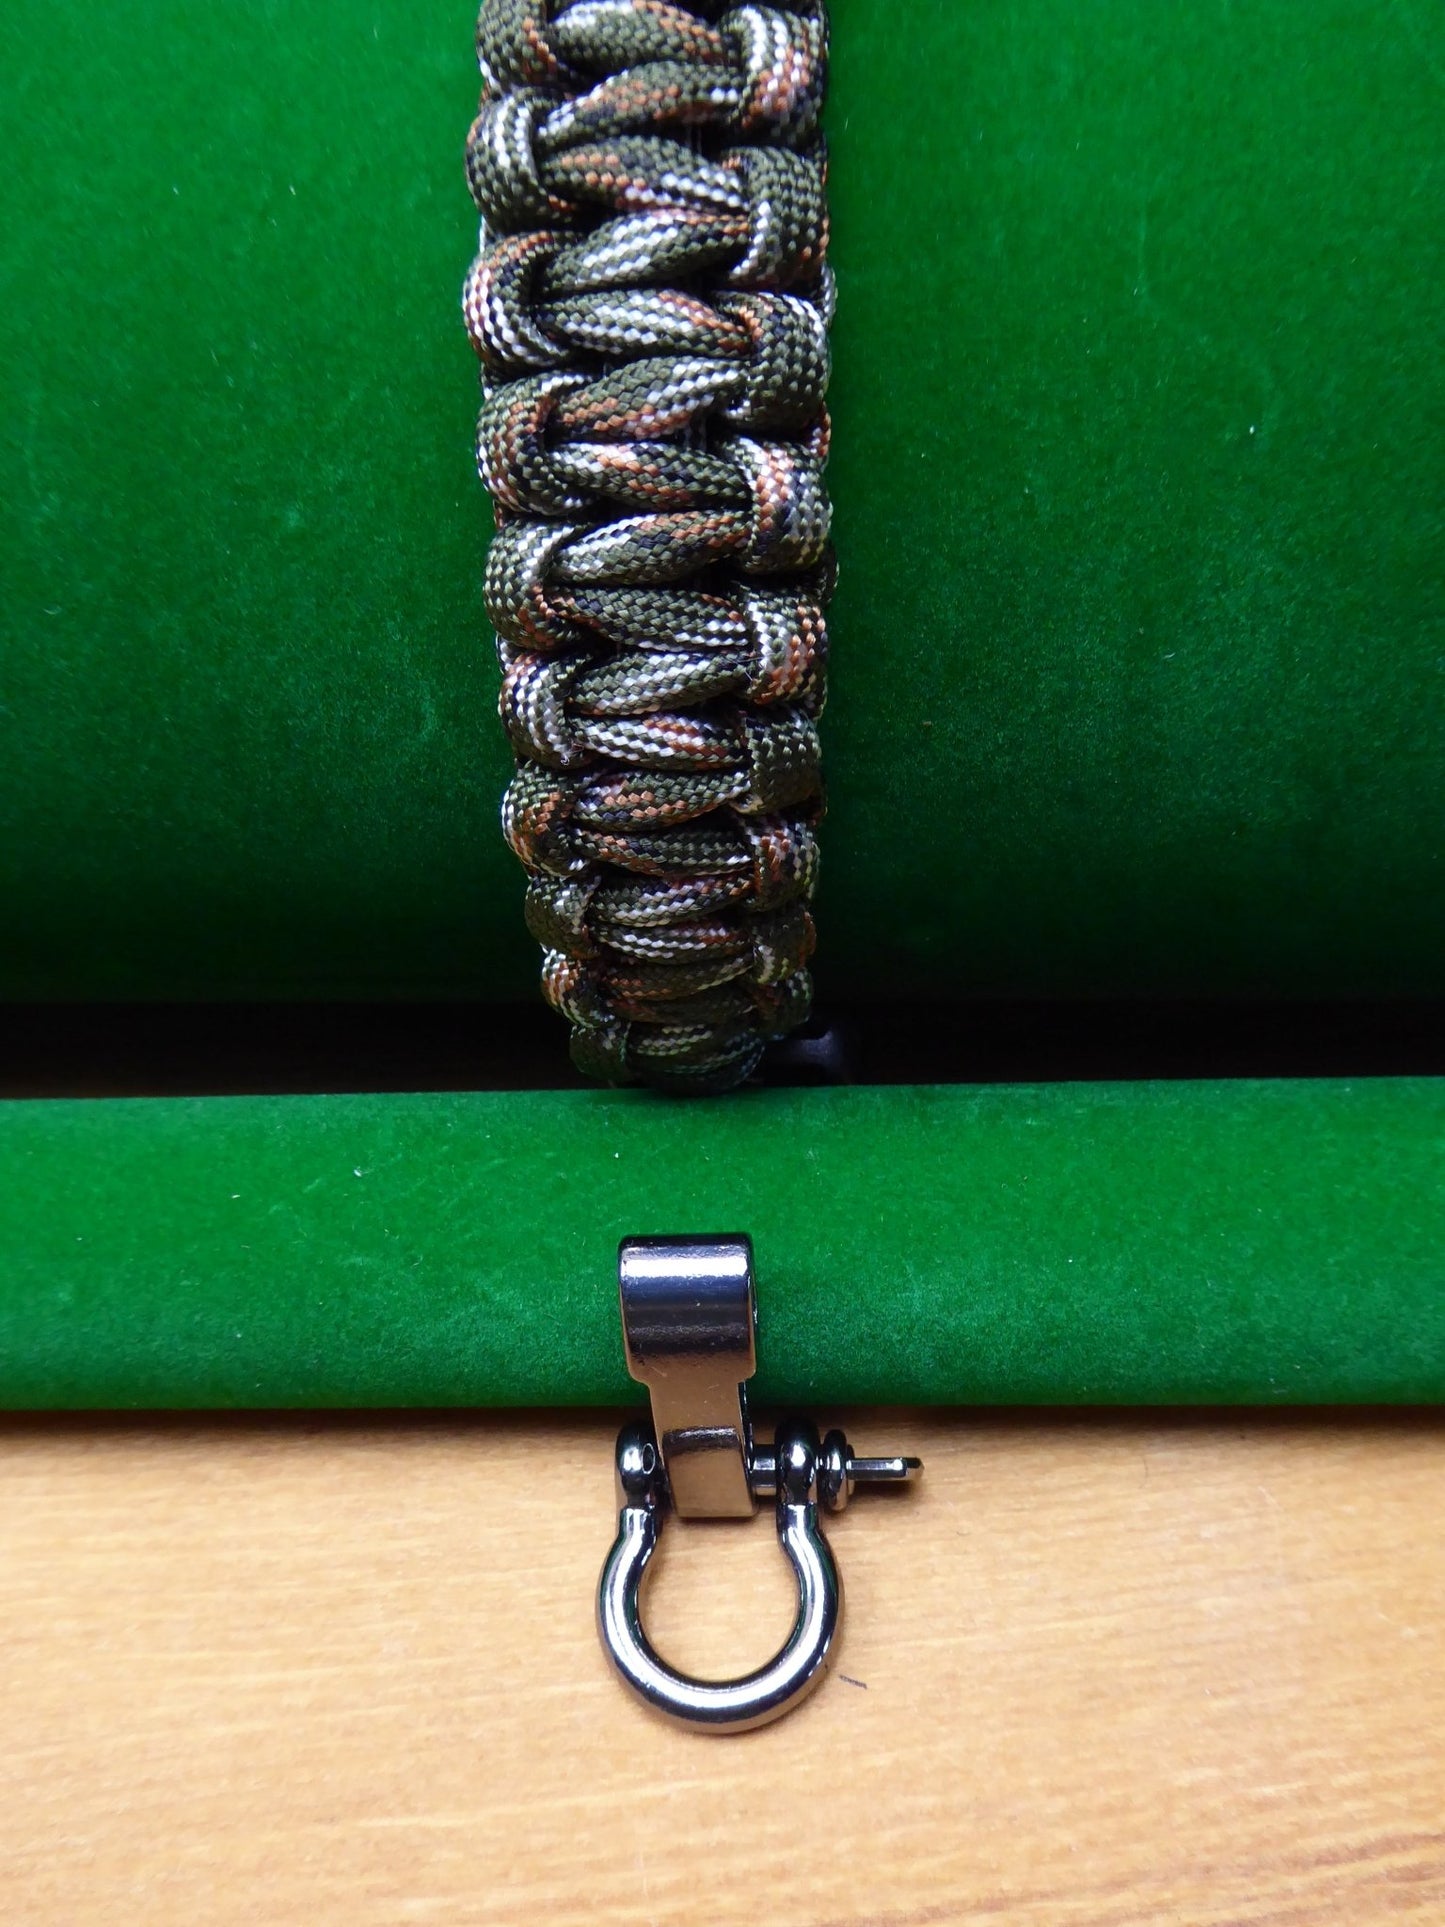 Paracord Buckle Bracelet kits with choice of colours Paracord Huggins Attic Green Camo Gun metal Buckle  [Huggins attic]